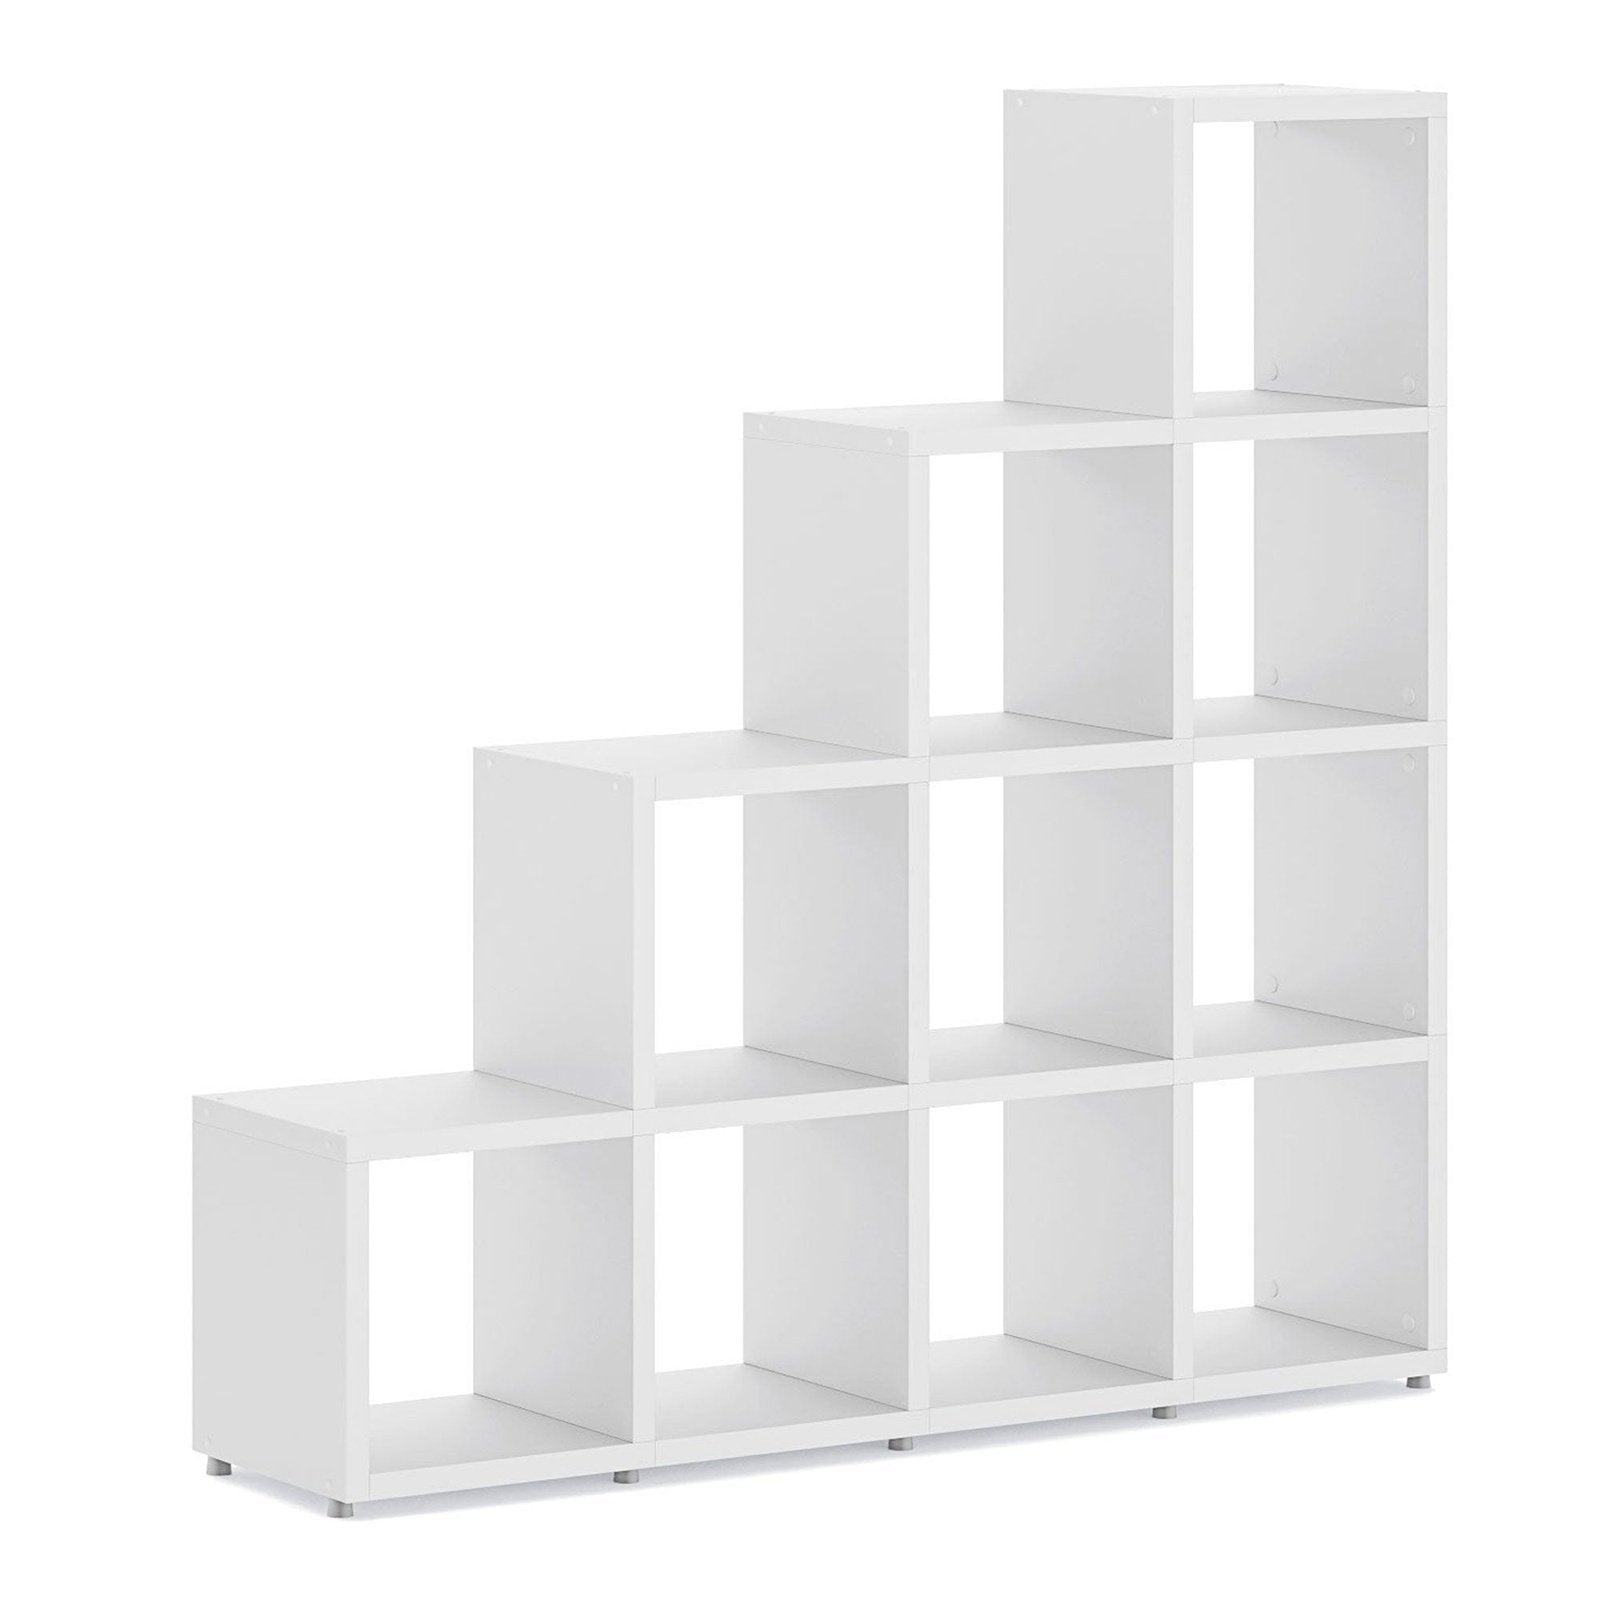 Boon 10x Cube Stepped Shelf Storage System - 1470x1450x330mm - Office Products Online